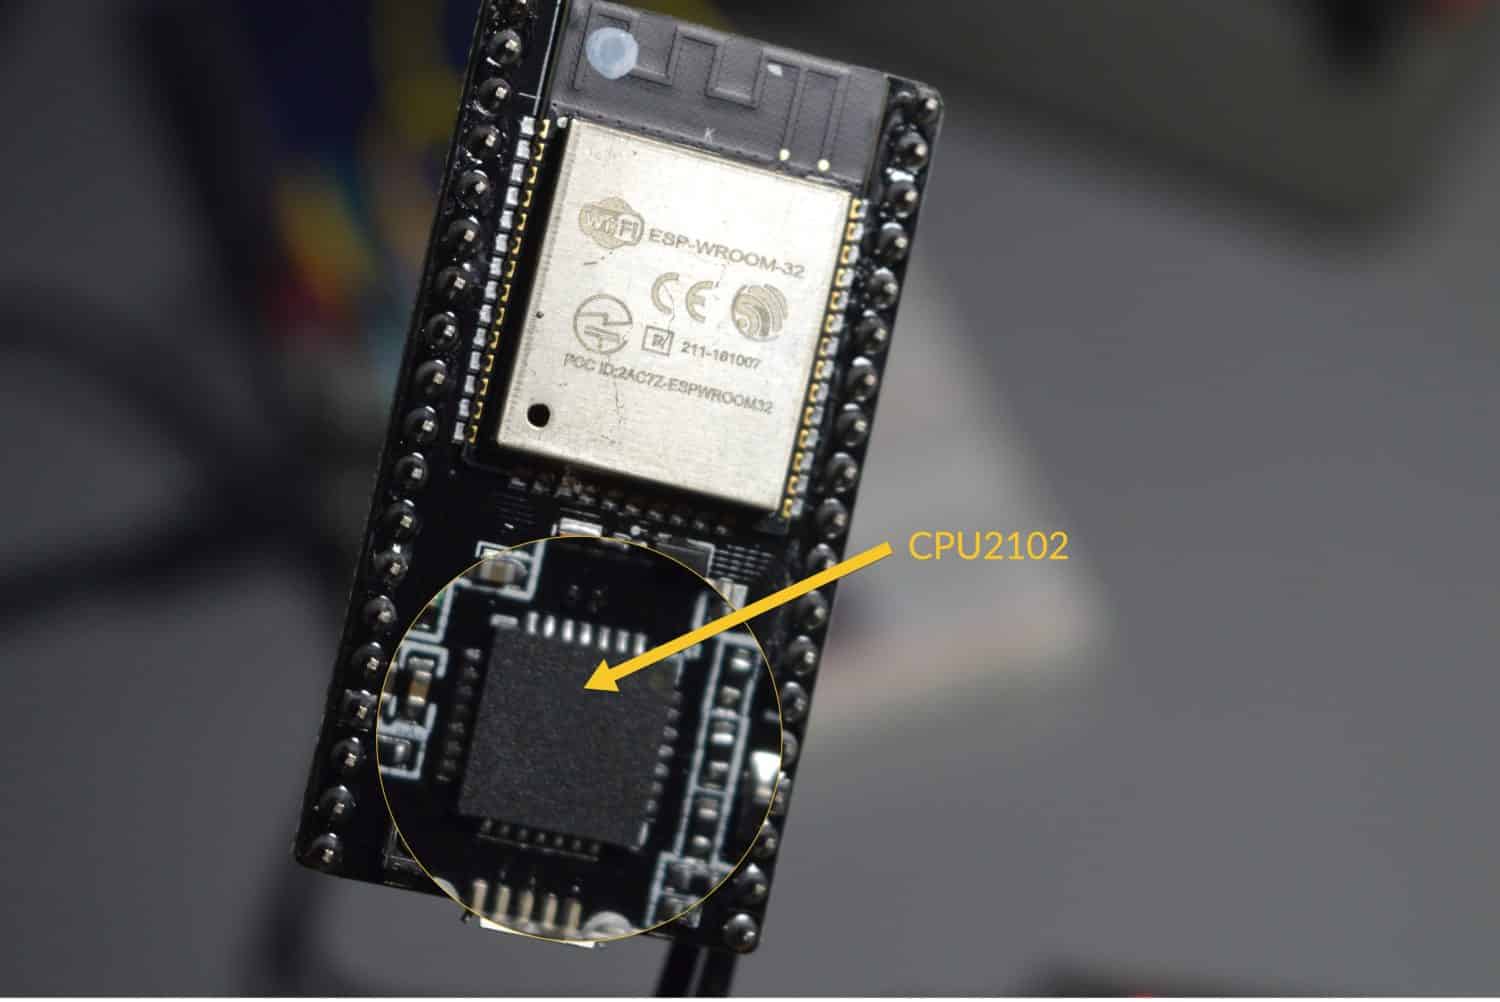 How to install the drivers for the USB bridge chip for the ESP32